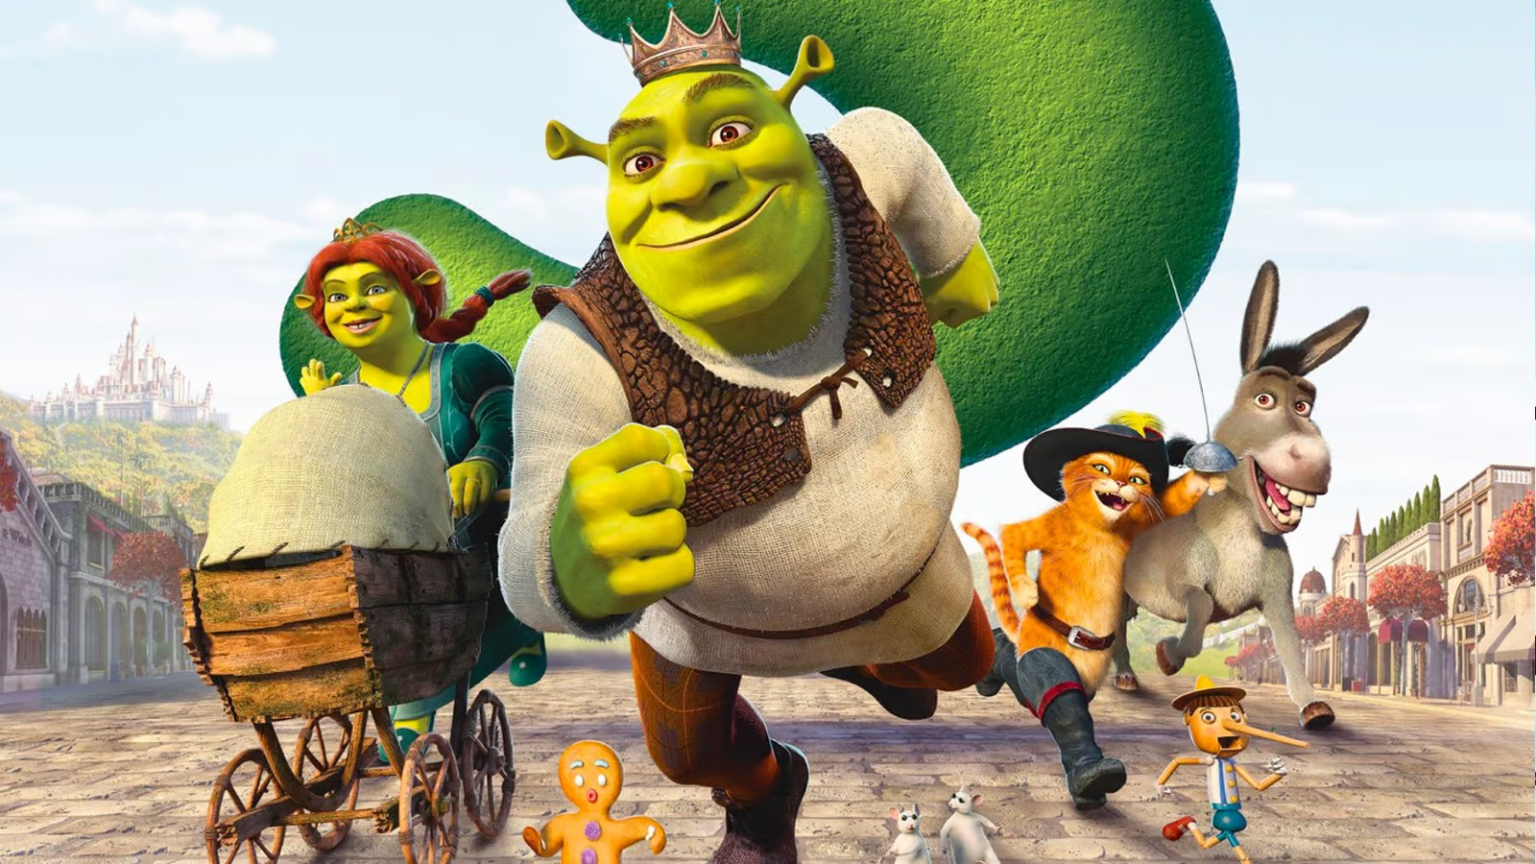 Shrek 5 Release Date, Cast, Plot and Everything You Need to Know